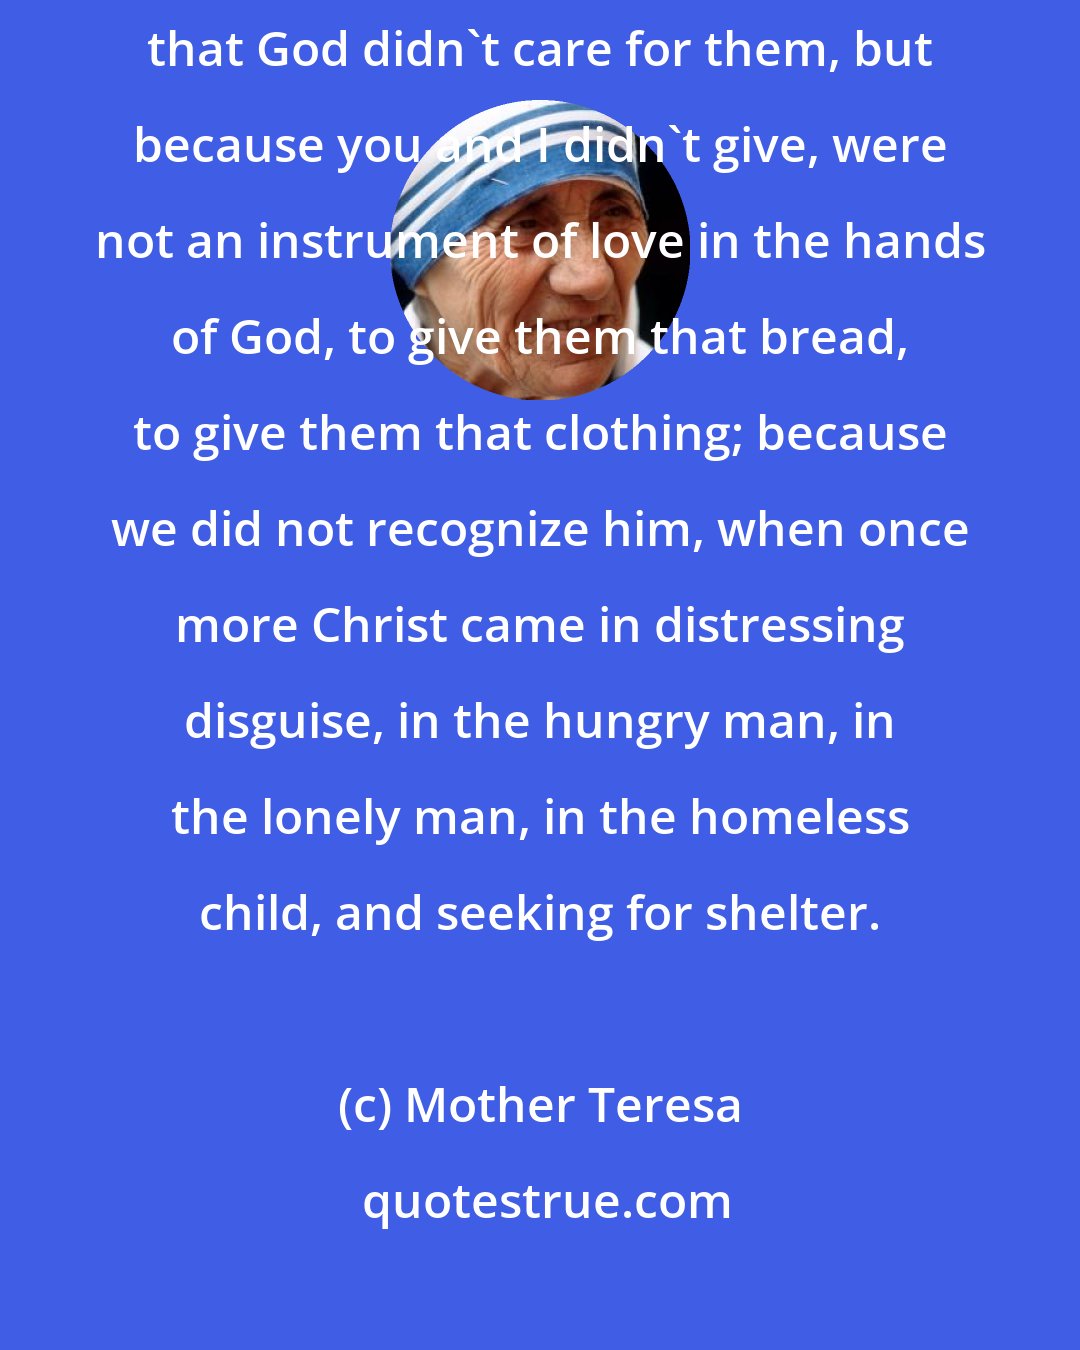 Mother Teresa: If sometimes our poor people have had to die of starvation, it is not that God didn't care for them, but because you and I didn't give, were not an instrument of love in the hands of God, to give them that bread, to give them that clothing; because we did not recognize him, when once more Christ came in distressing disguise, in the hungry man, in the lonely man, in the homeless child, and seeking for shelter.